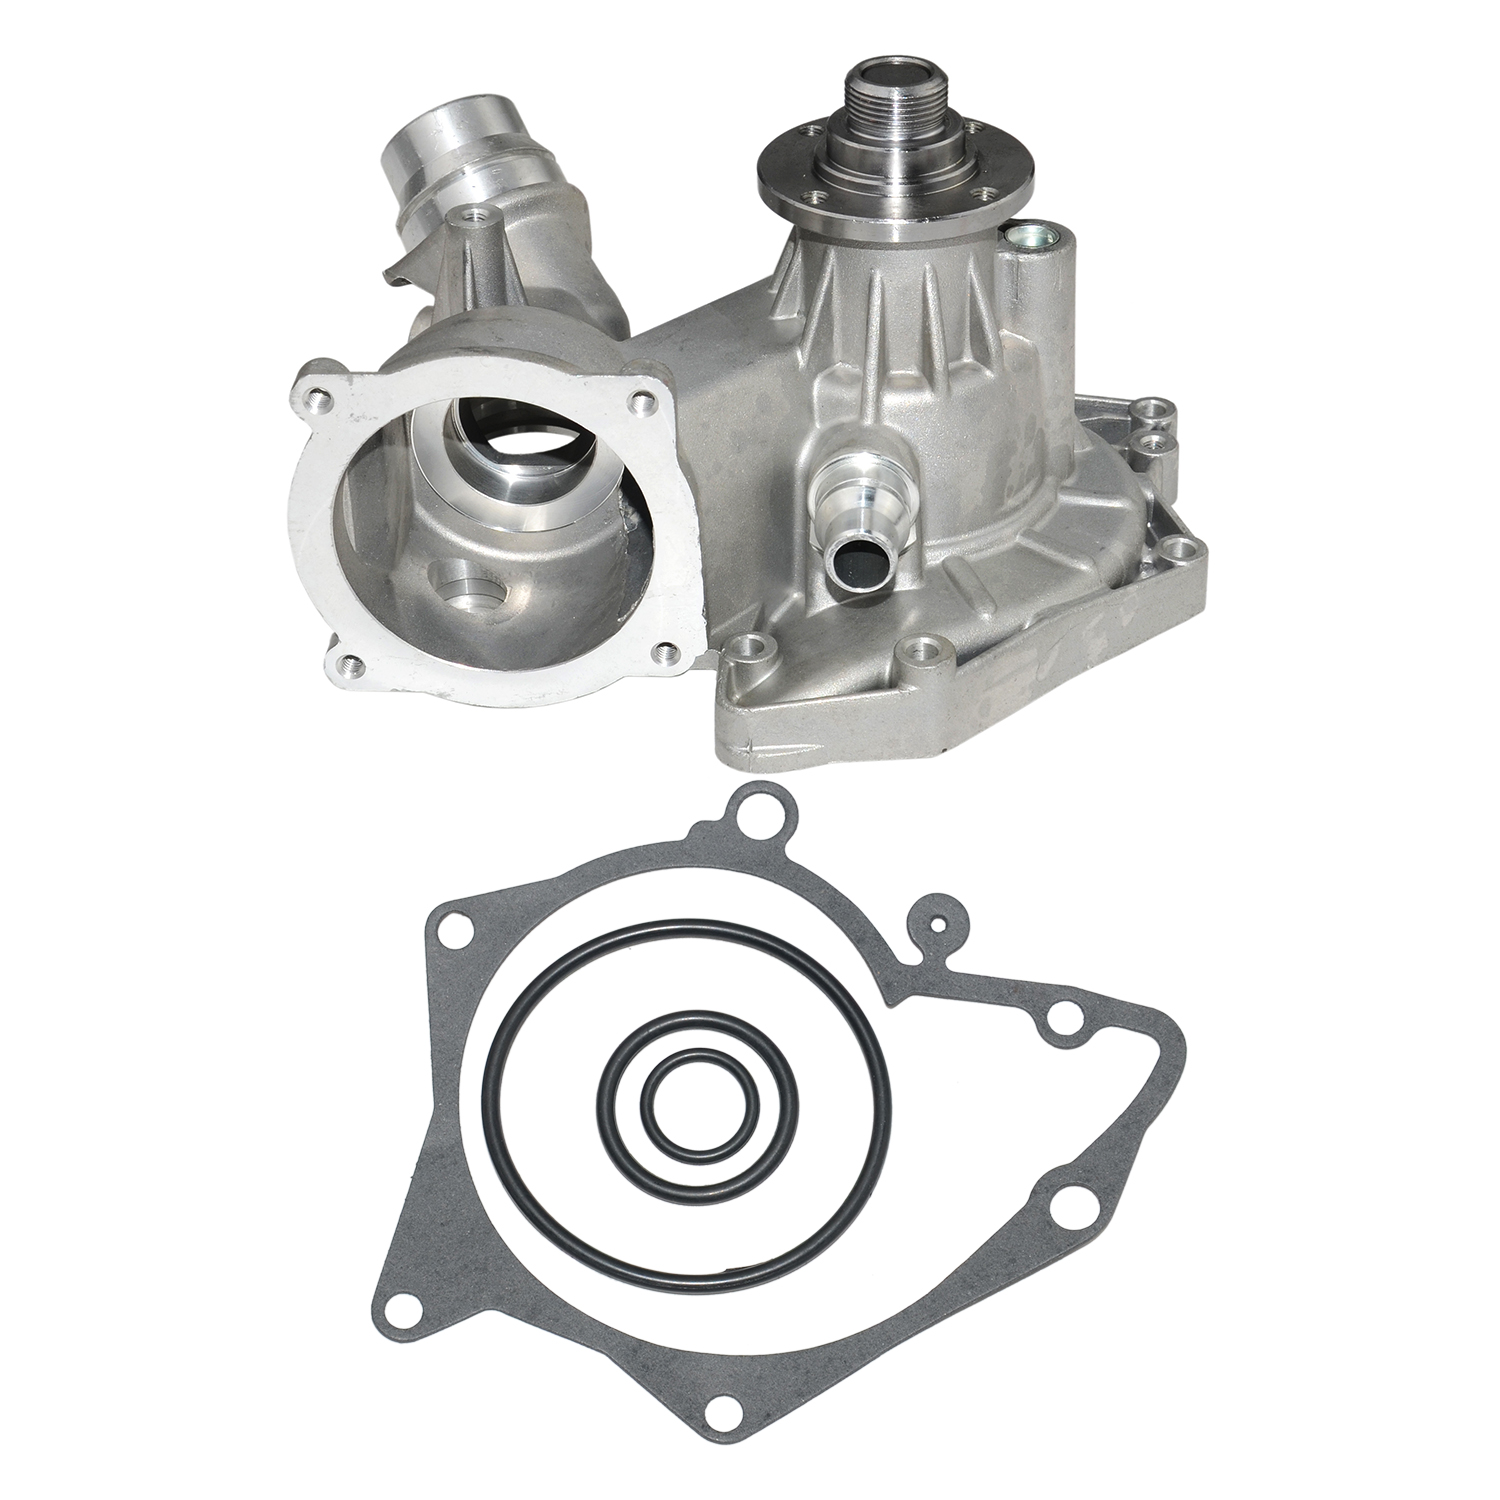 11510393336 For BMW X5 E53 E39 E63 E64 540i 545i 645Ci 4.4L Water Pump 11511713266 11511742598 8510324 PEB000030 - image 1 of 10